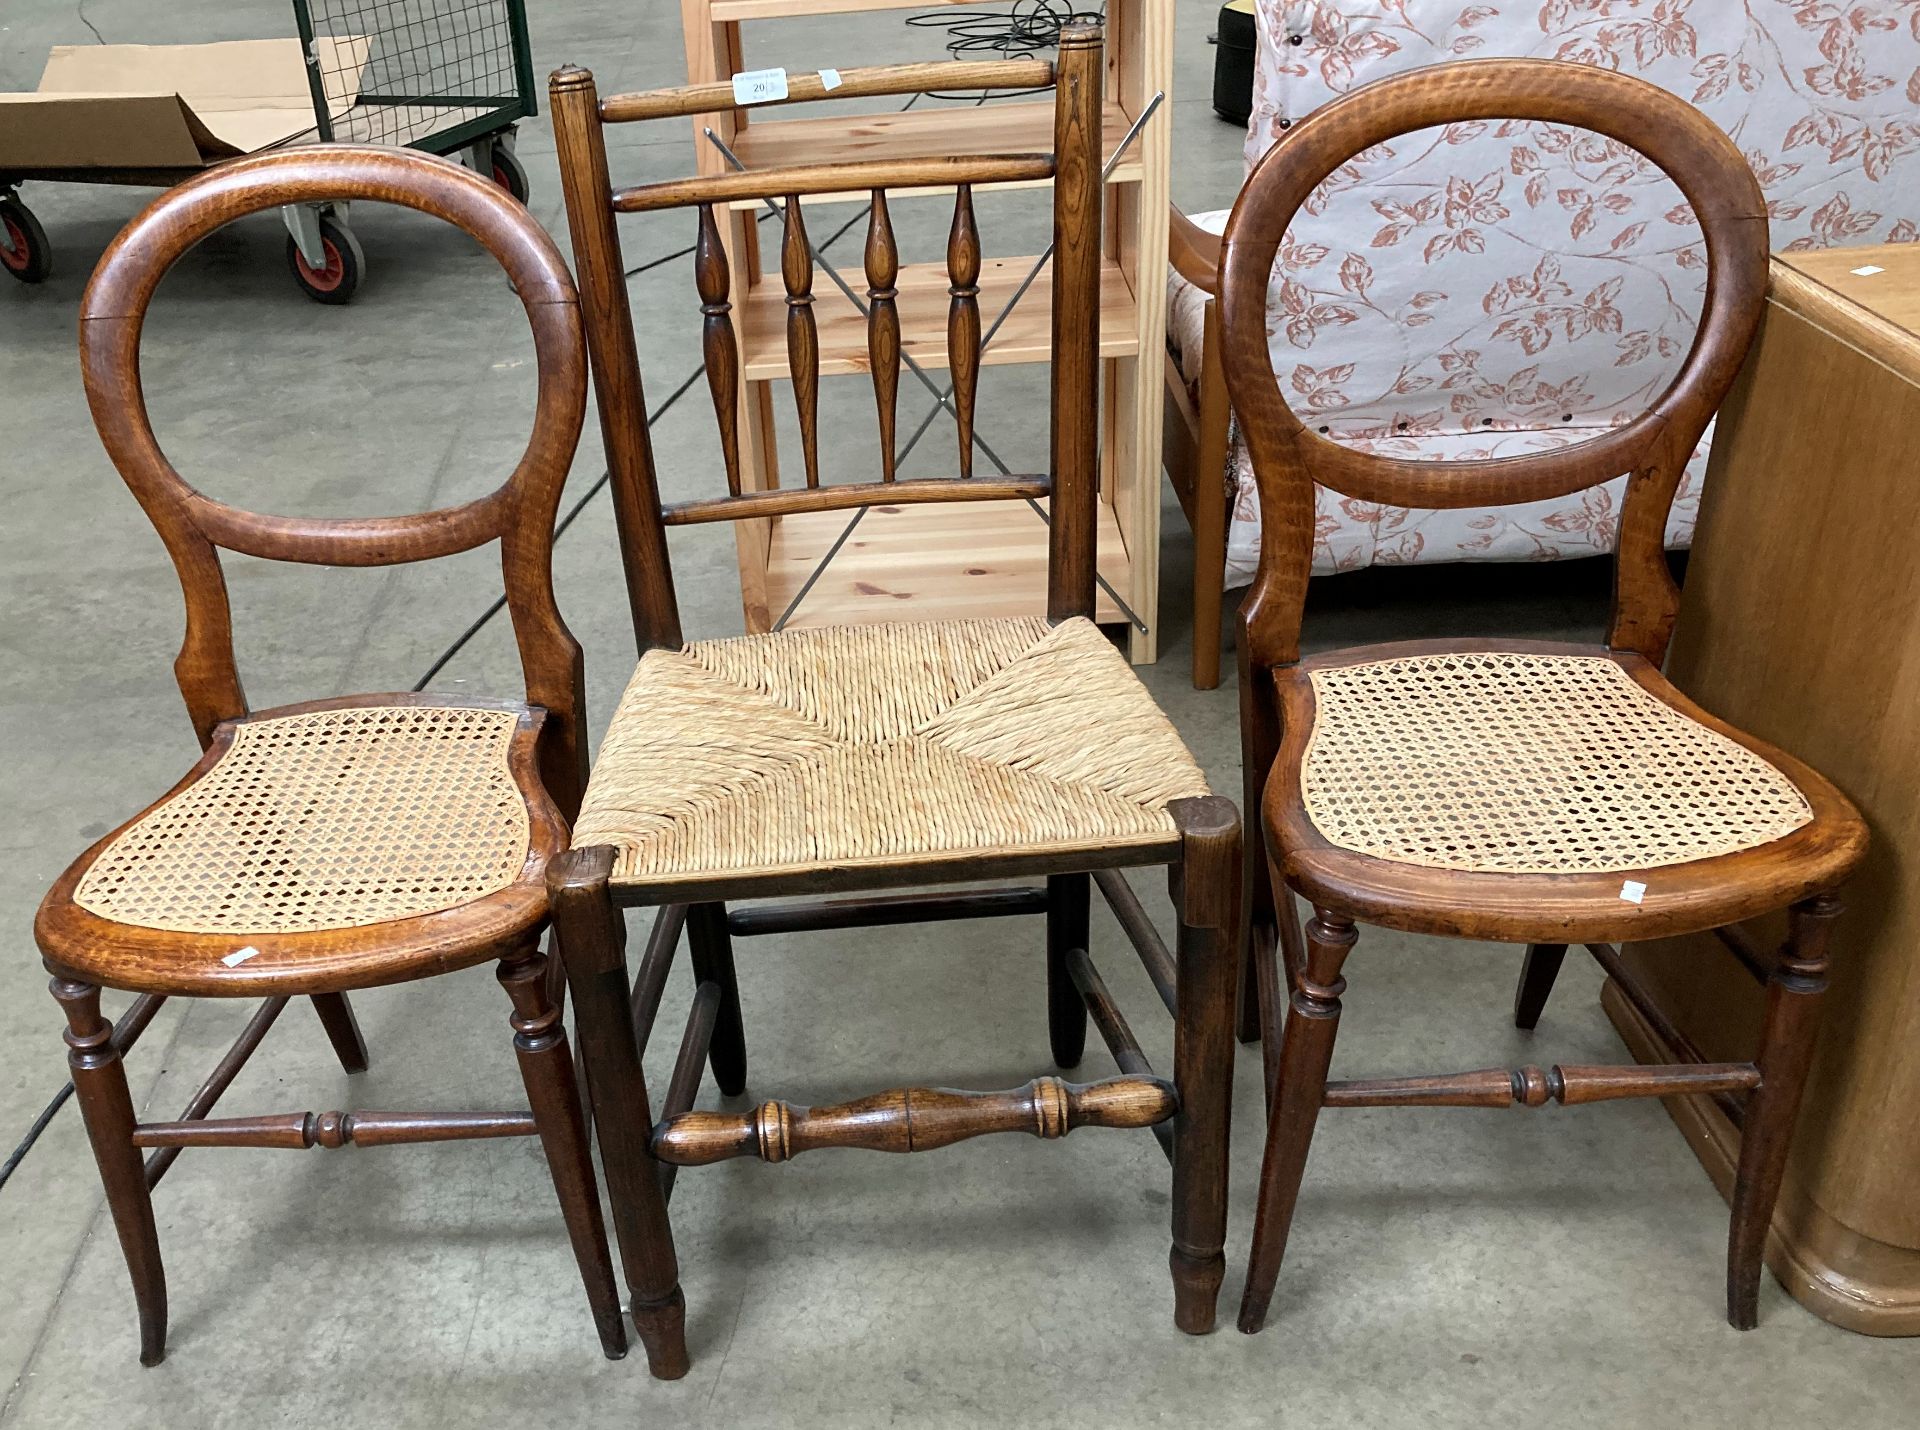 Three assorted wooden chairs,